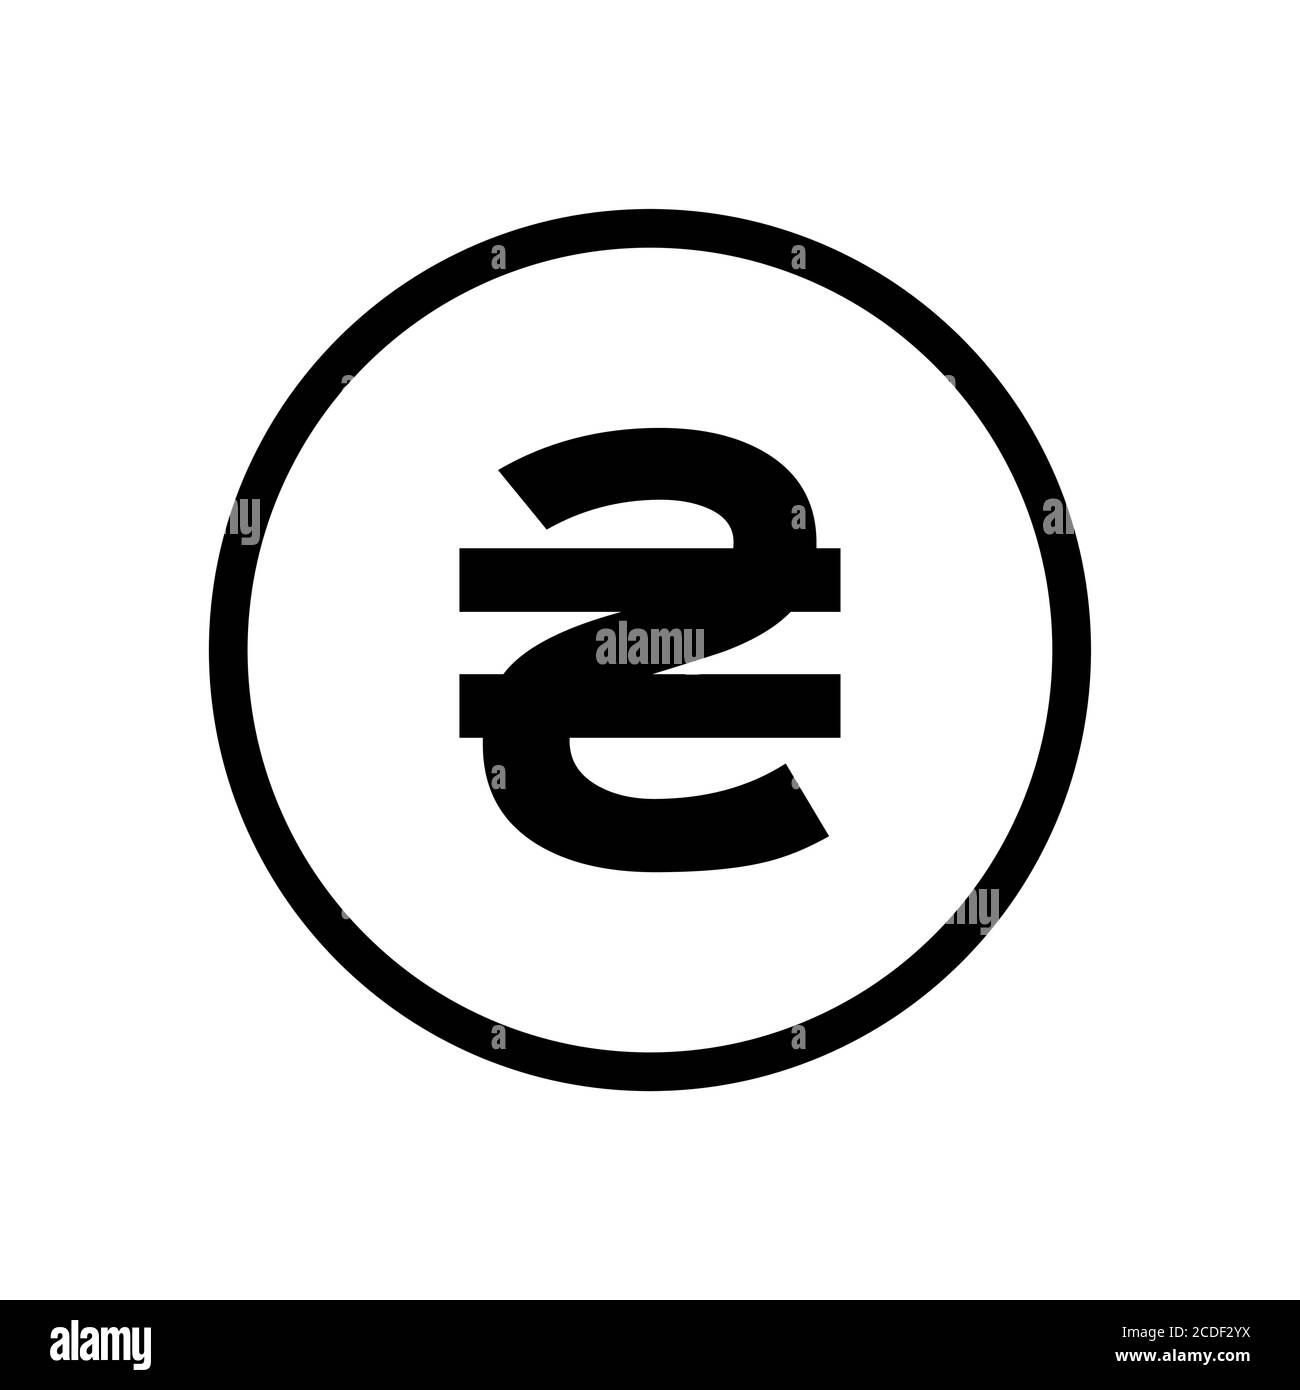 Hryvnia icon coin monochrome black and white icon. Current currency symbol. Stock Vector